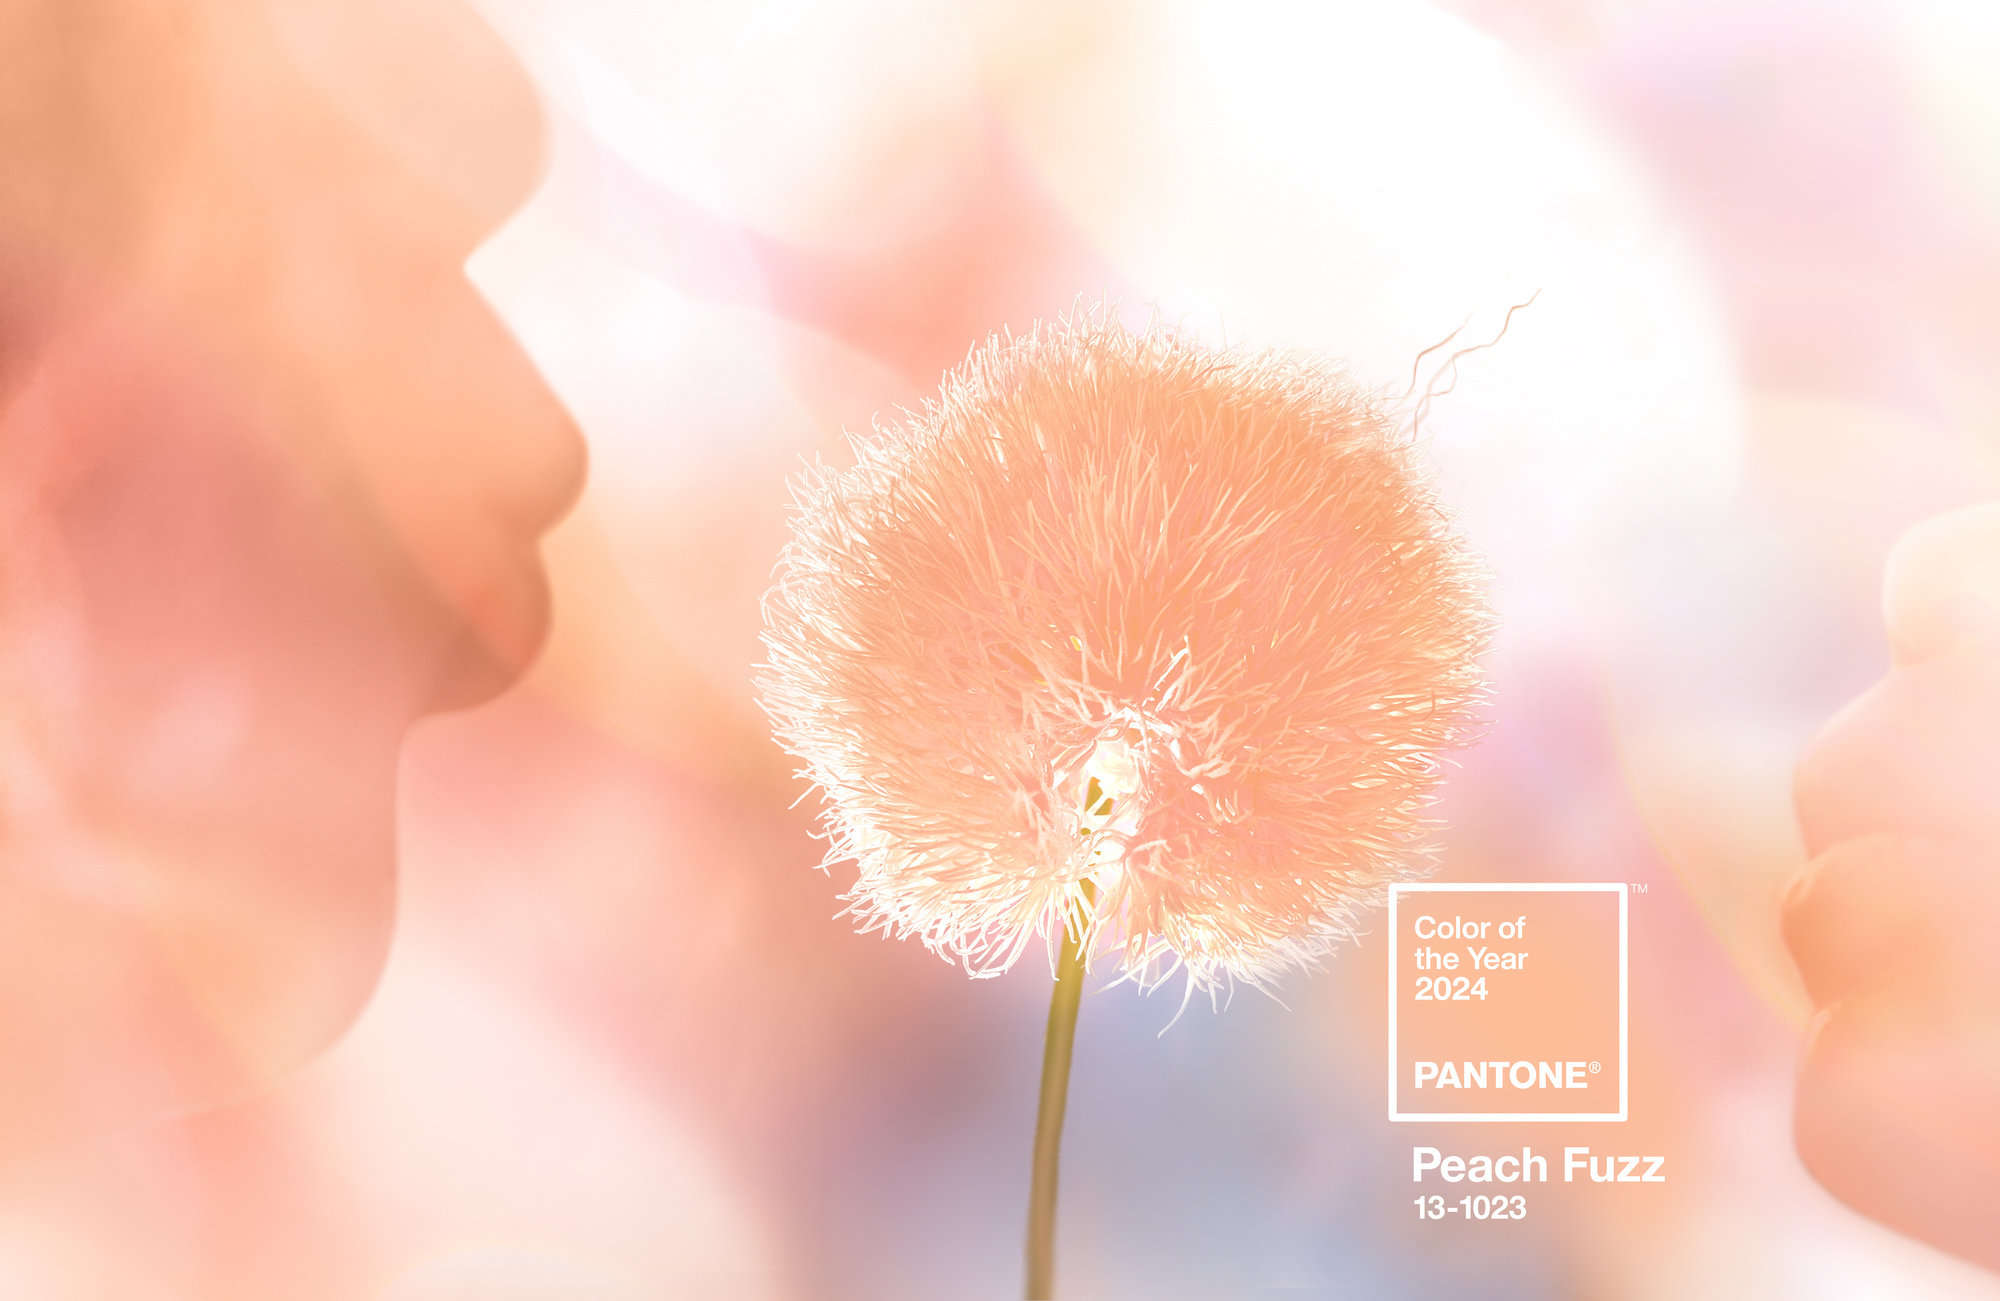 sincerecopy pantone reveals peach fuzz as color of the year 2024